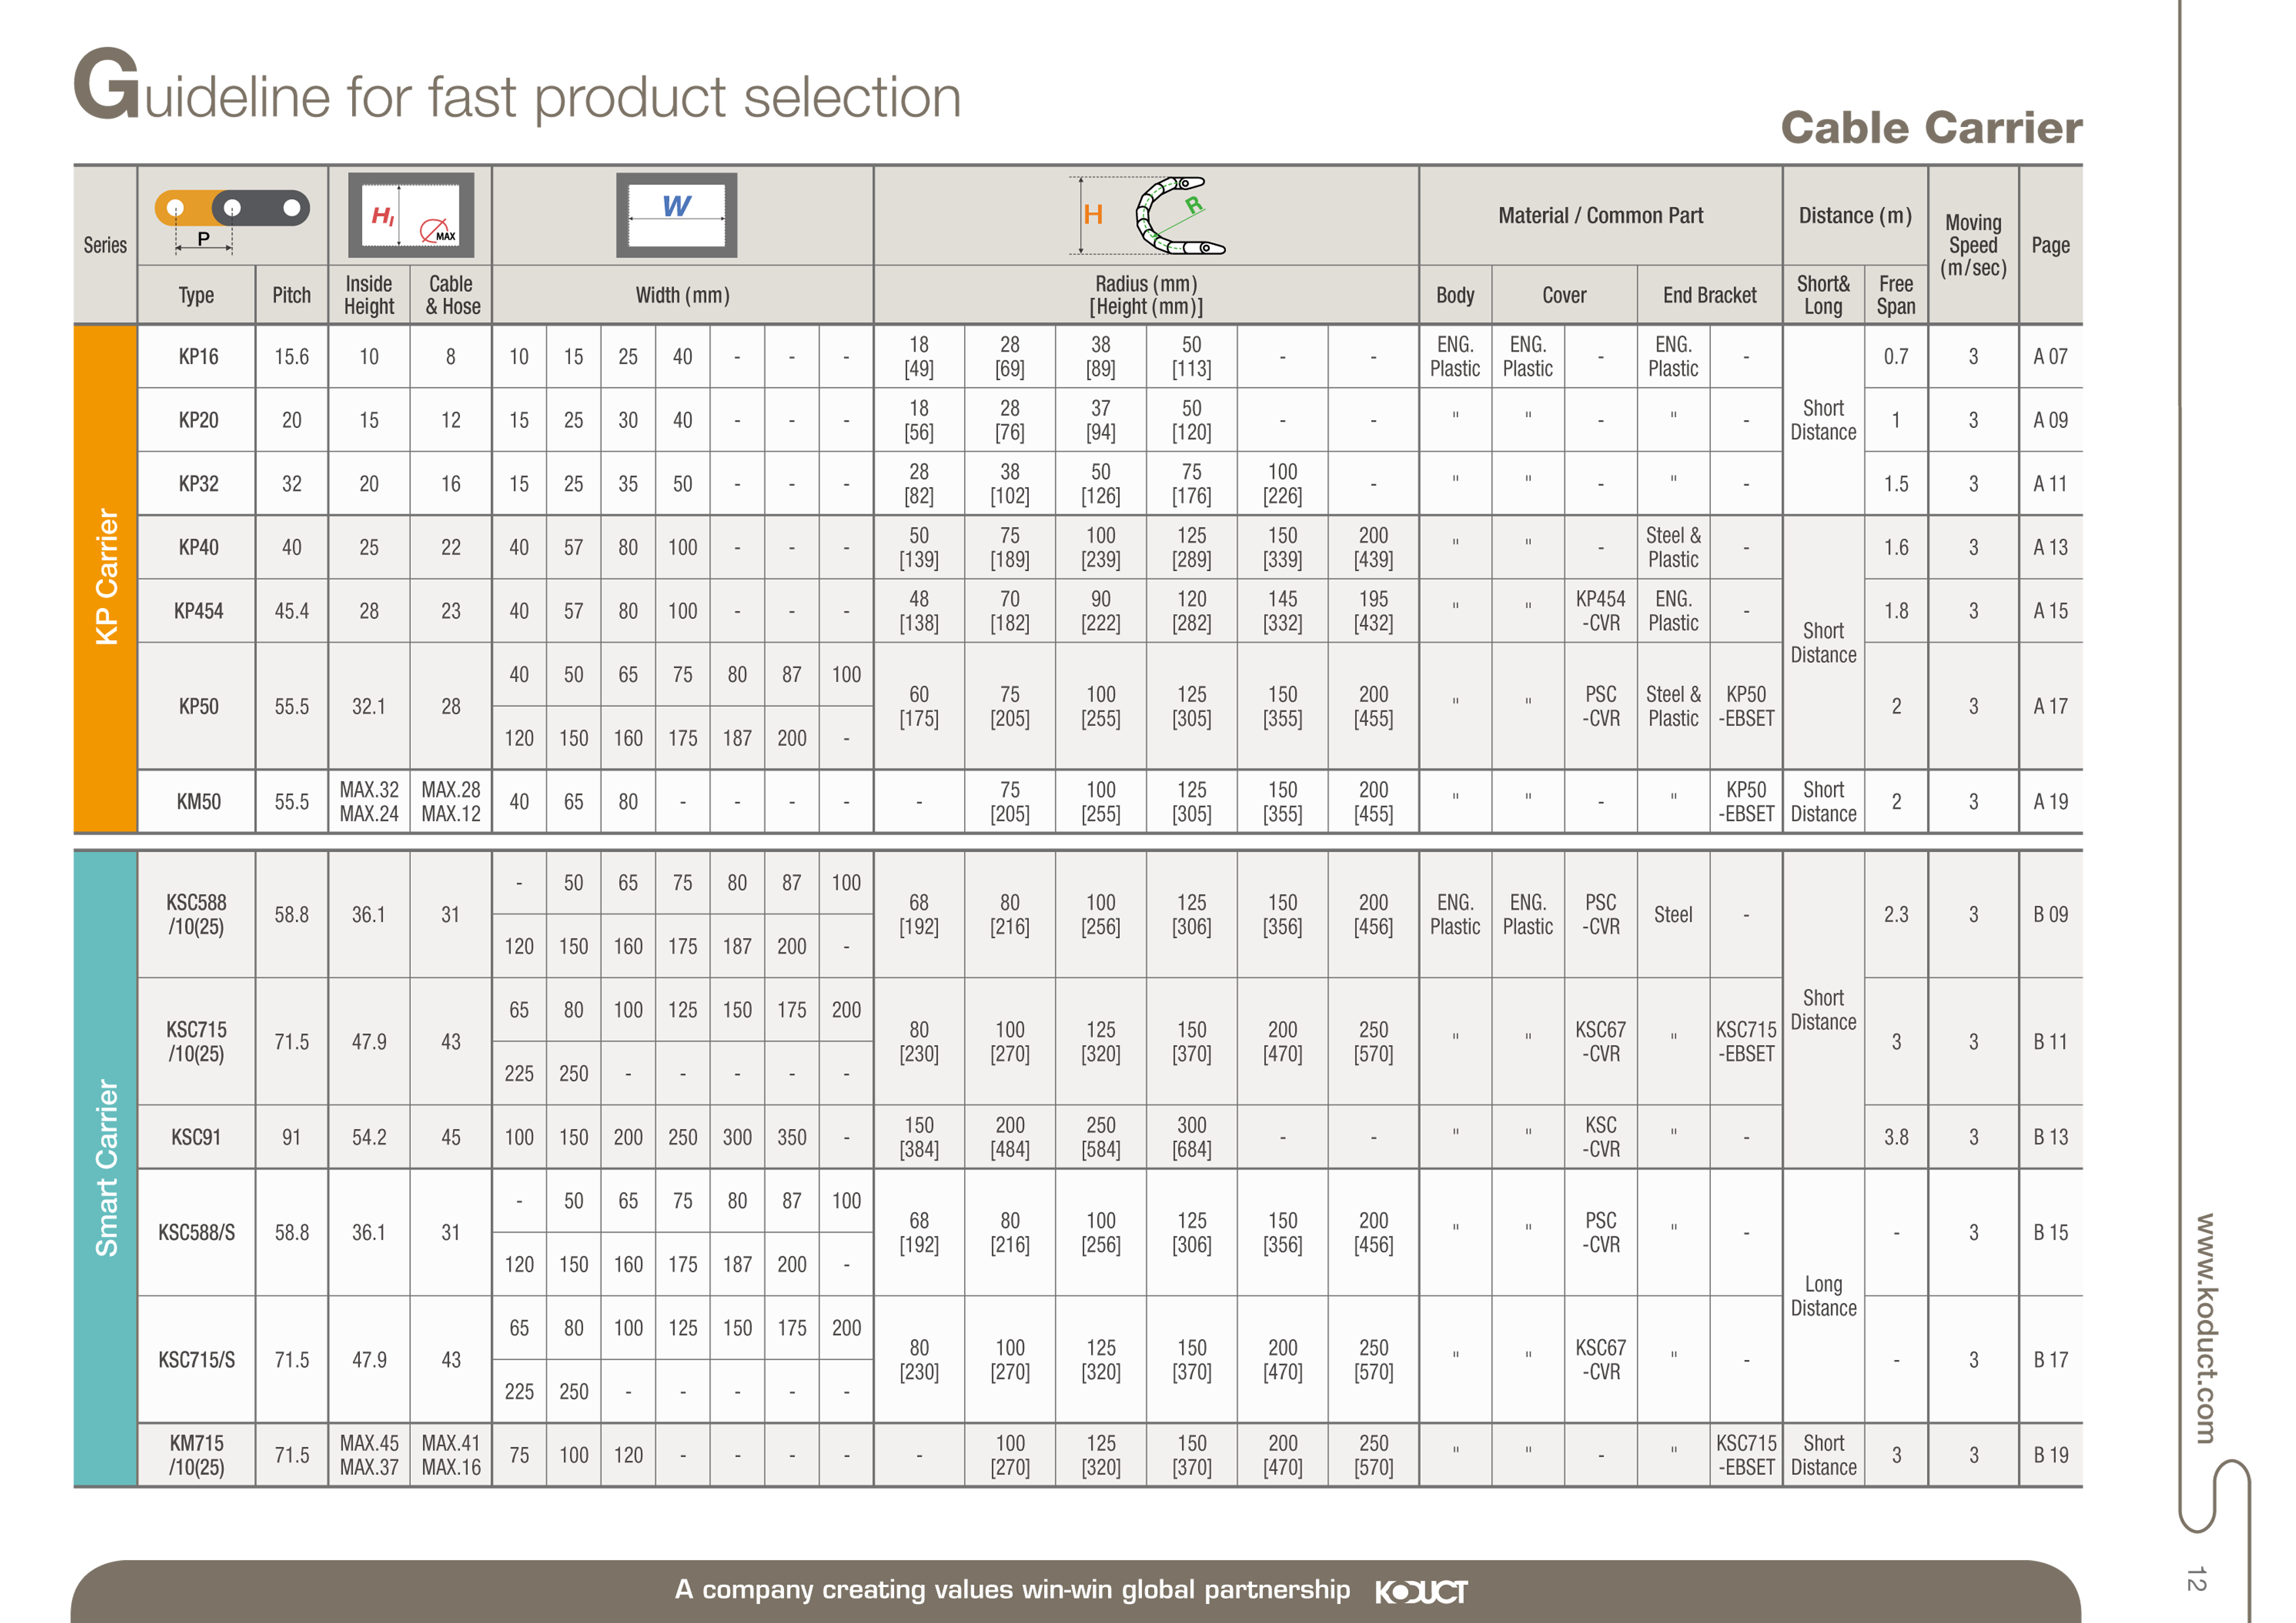 Cable Carrier Index